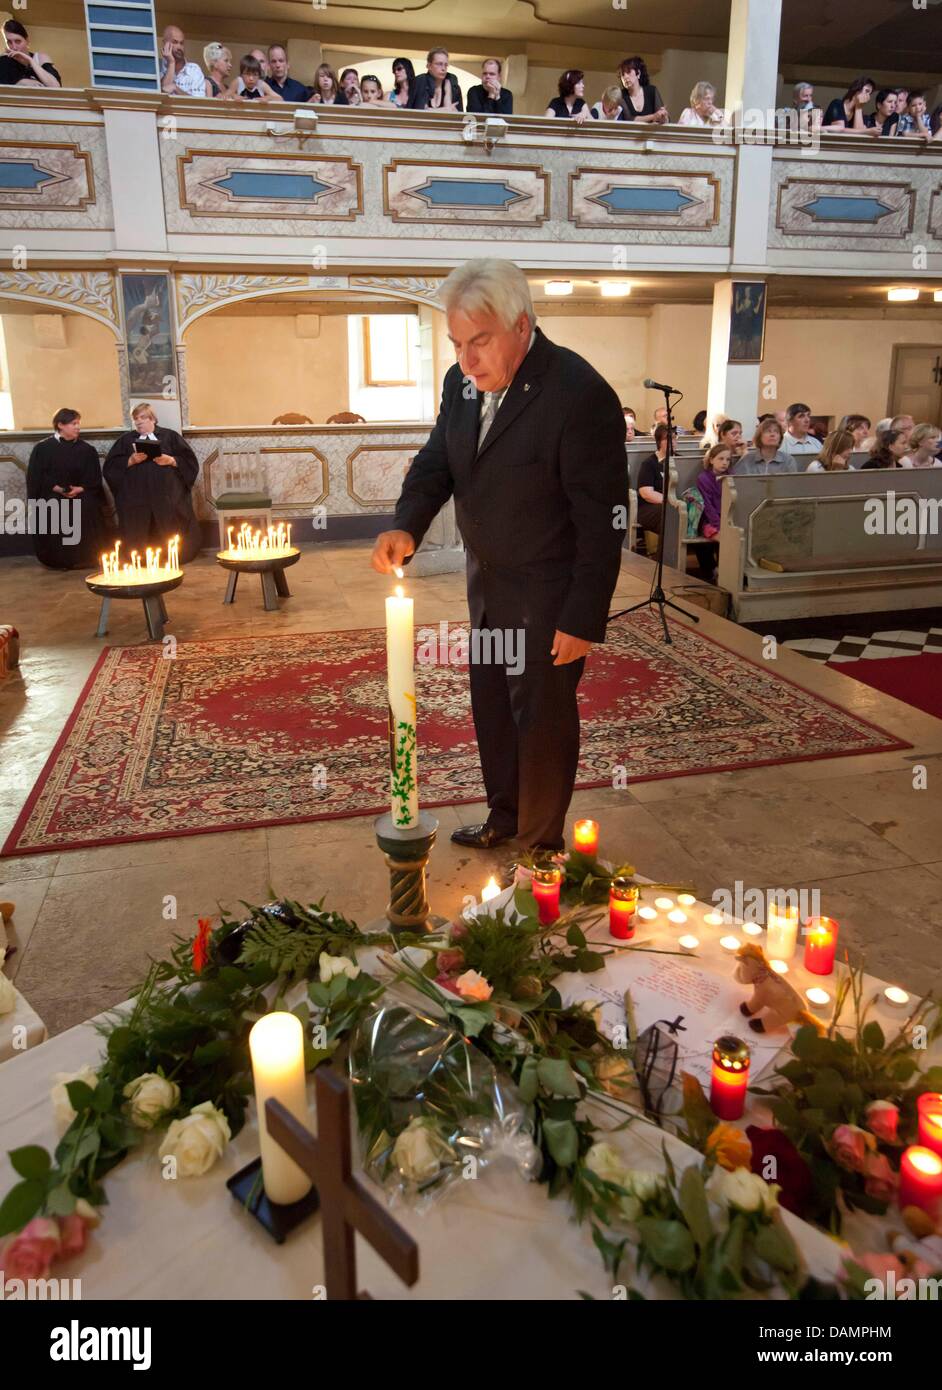 Mayor of Zella-Mehlis Karl-Uwe Panse lights a candle at the alter of the Magdalene Church at the beginning of a memorial service for killed, seven year old Mary-Jane in Zella-Mehlis, Germany, 27 June 2011. Only one day after her disappearance, the body of Mary-Jane was discovered in a stream barely 1.5 kilometers from her mother's home. Photo: Michael Reichel Stock Photo